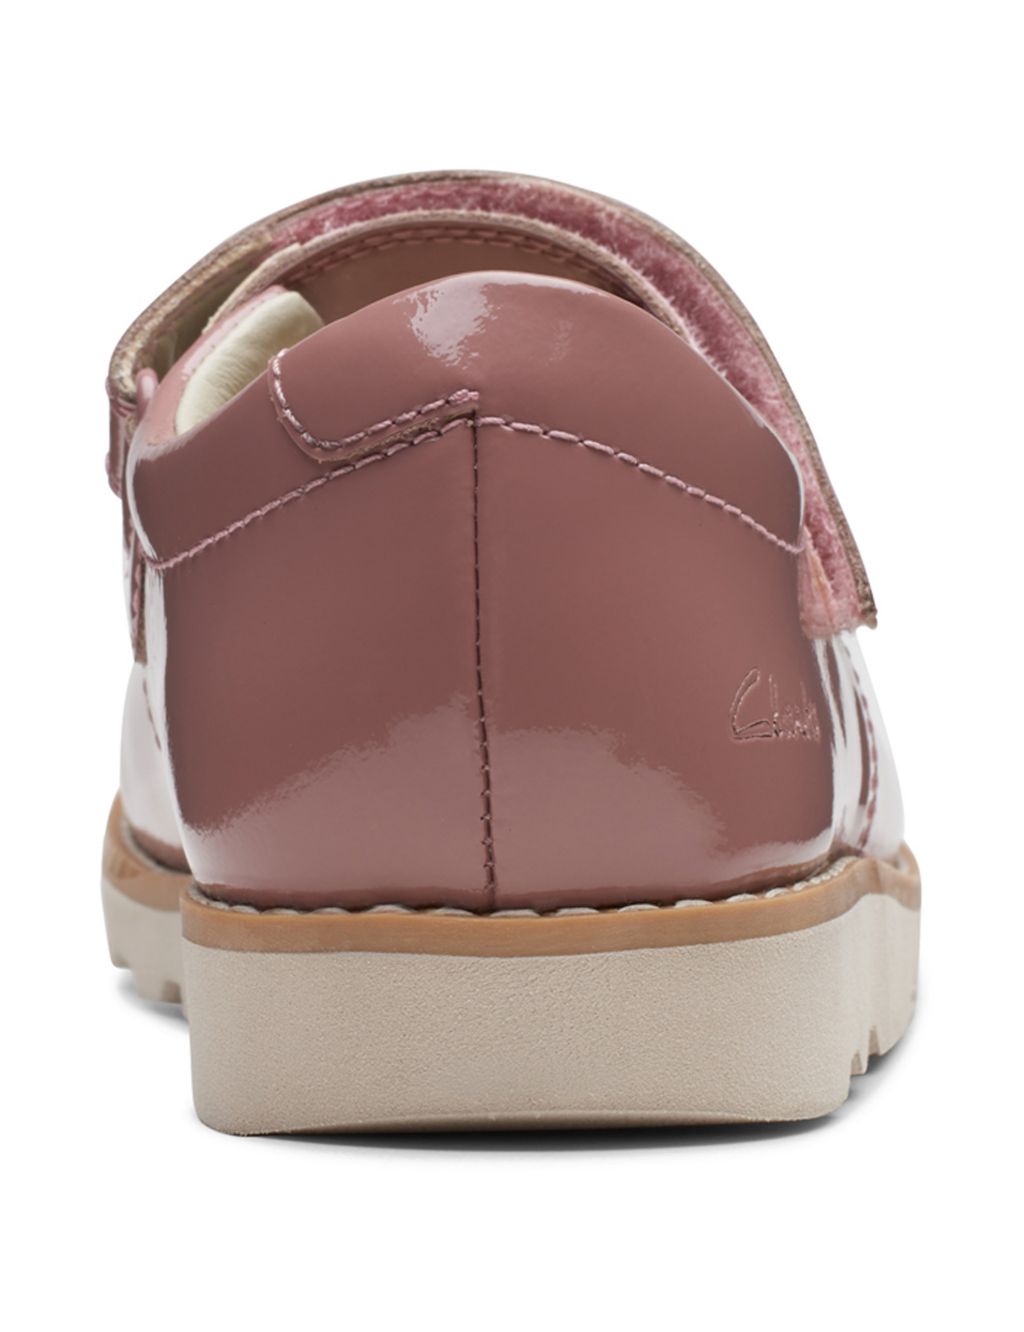 Kids' Leather Riptape Mary Jane Shoes (7 Small - 12½ Small) image 3